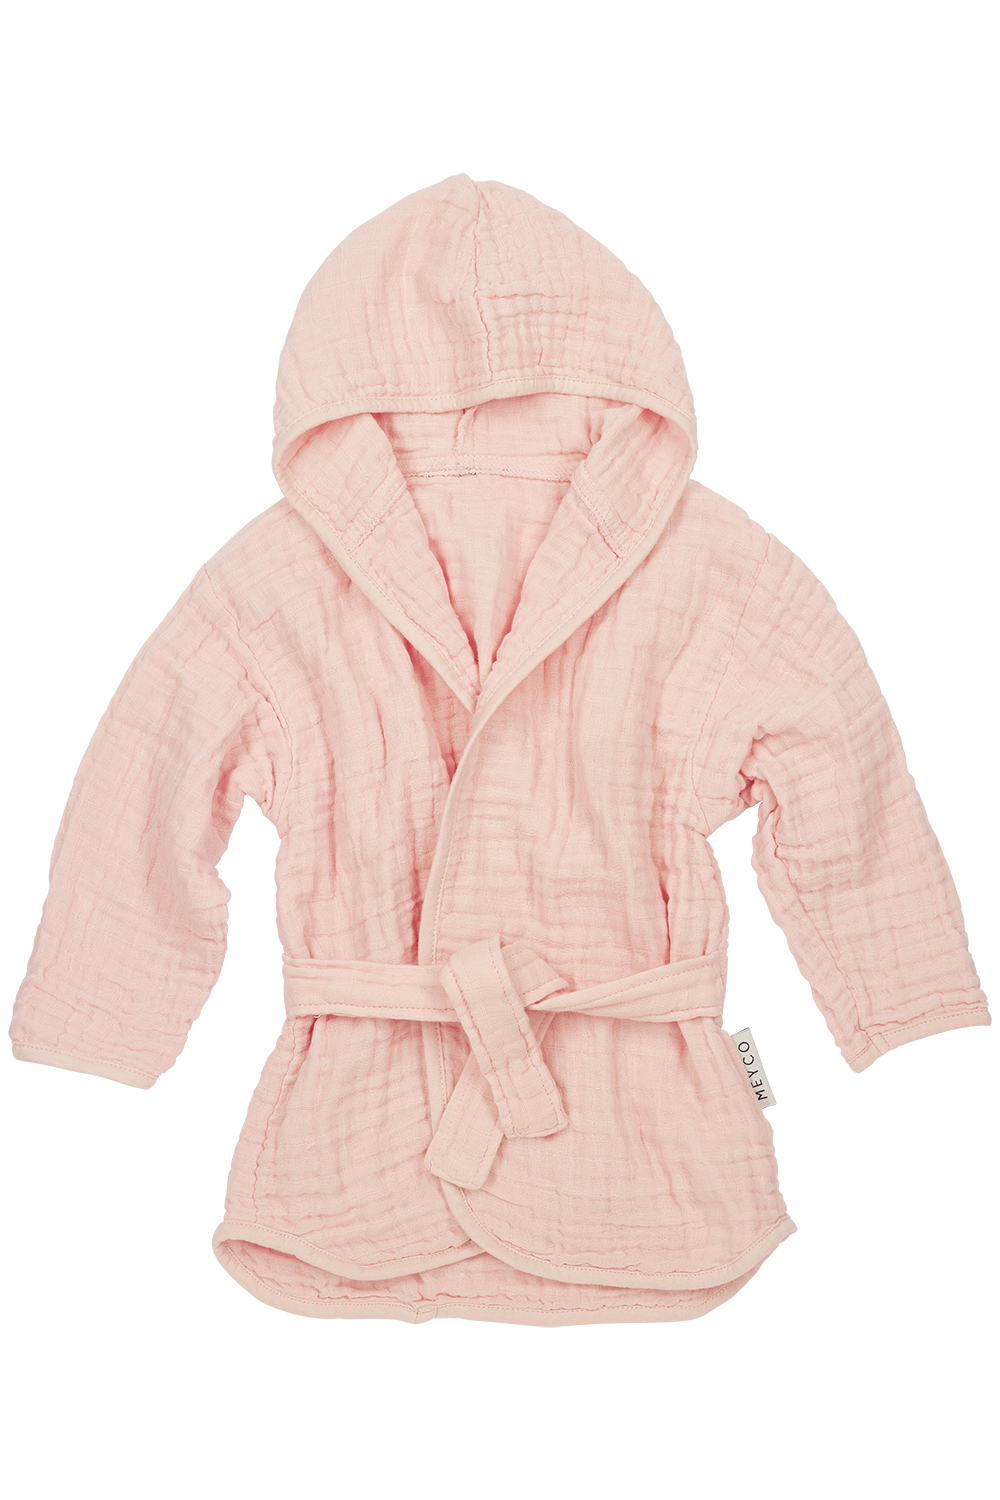 Bademantel pre-washed musselin Uni - soft pink - 86/92